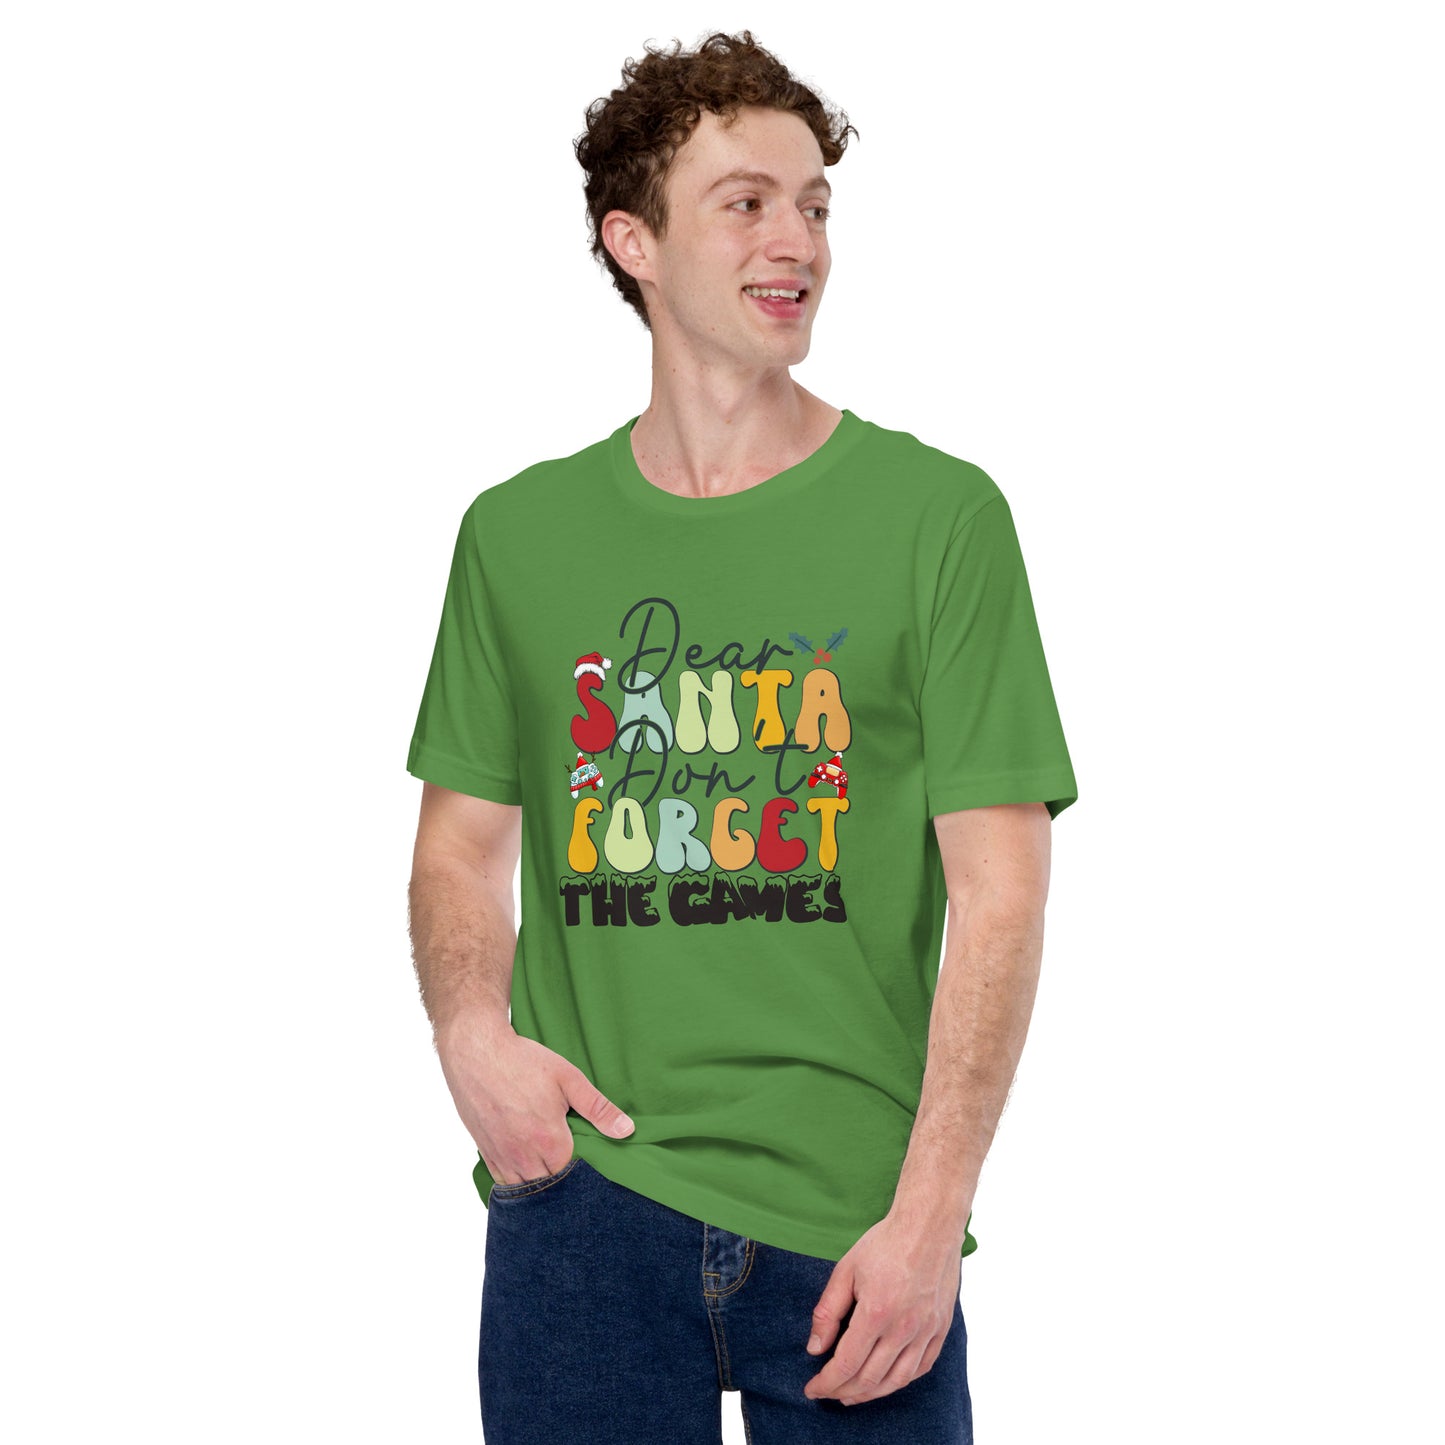 Dear Santa Don't Forget the Games | Unisex Casual Tee | Gamer Holiday Shirt